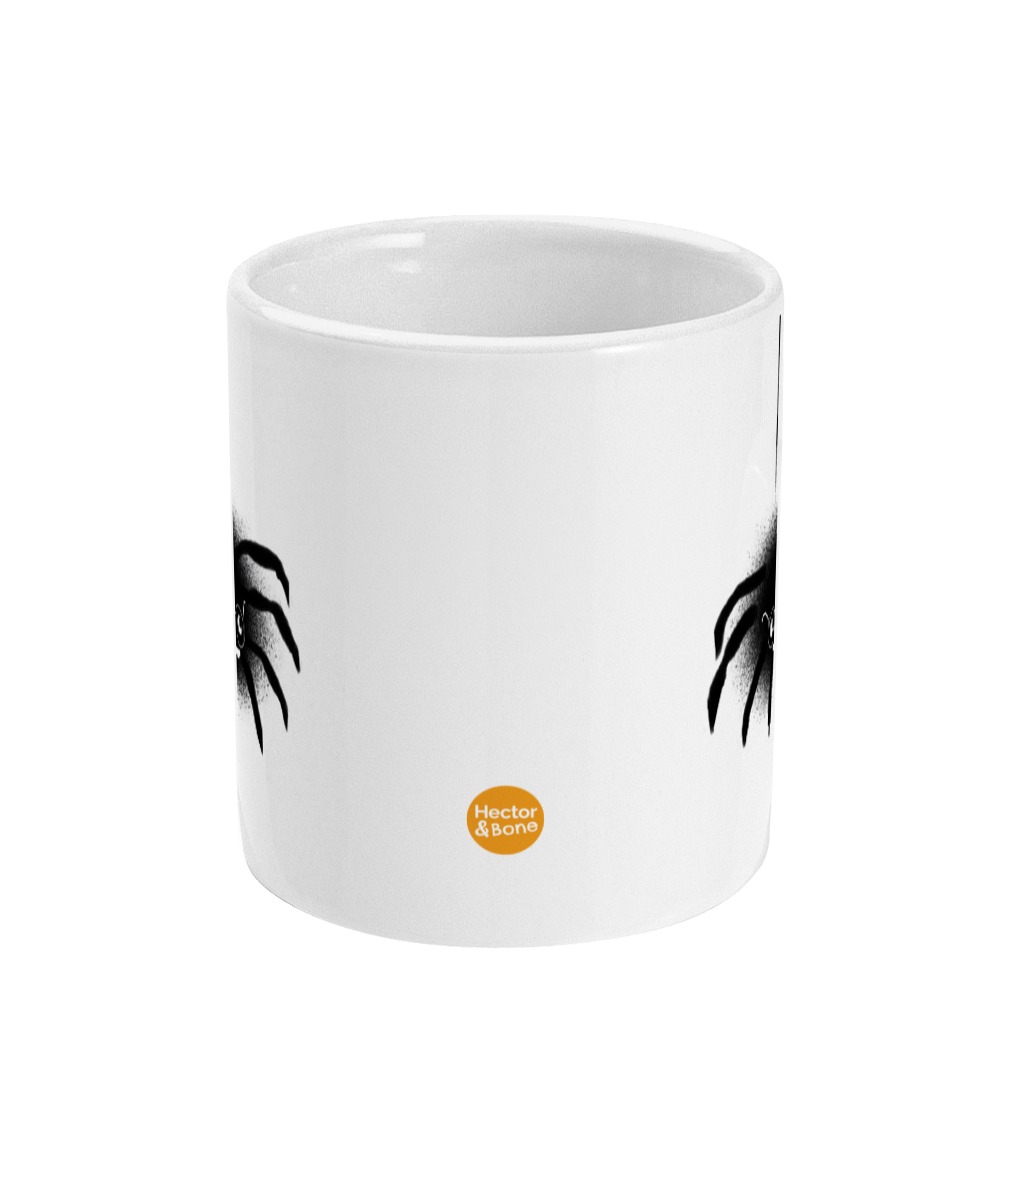 Hanging Spectacled Spider design coffee mug by Hector and Bone Front View